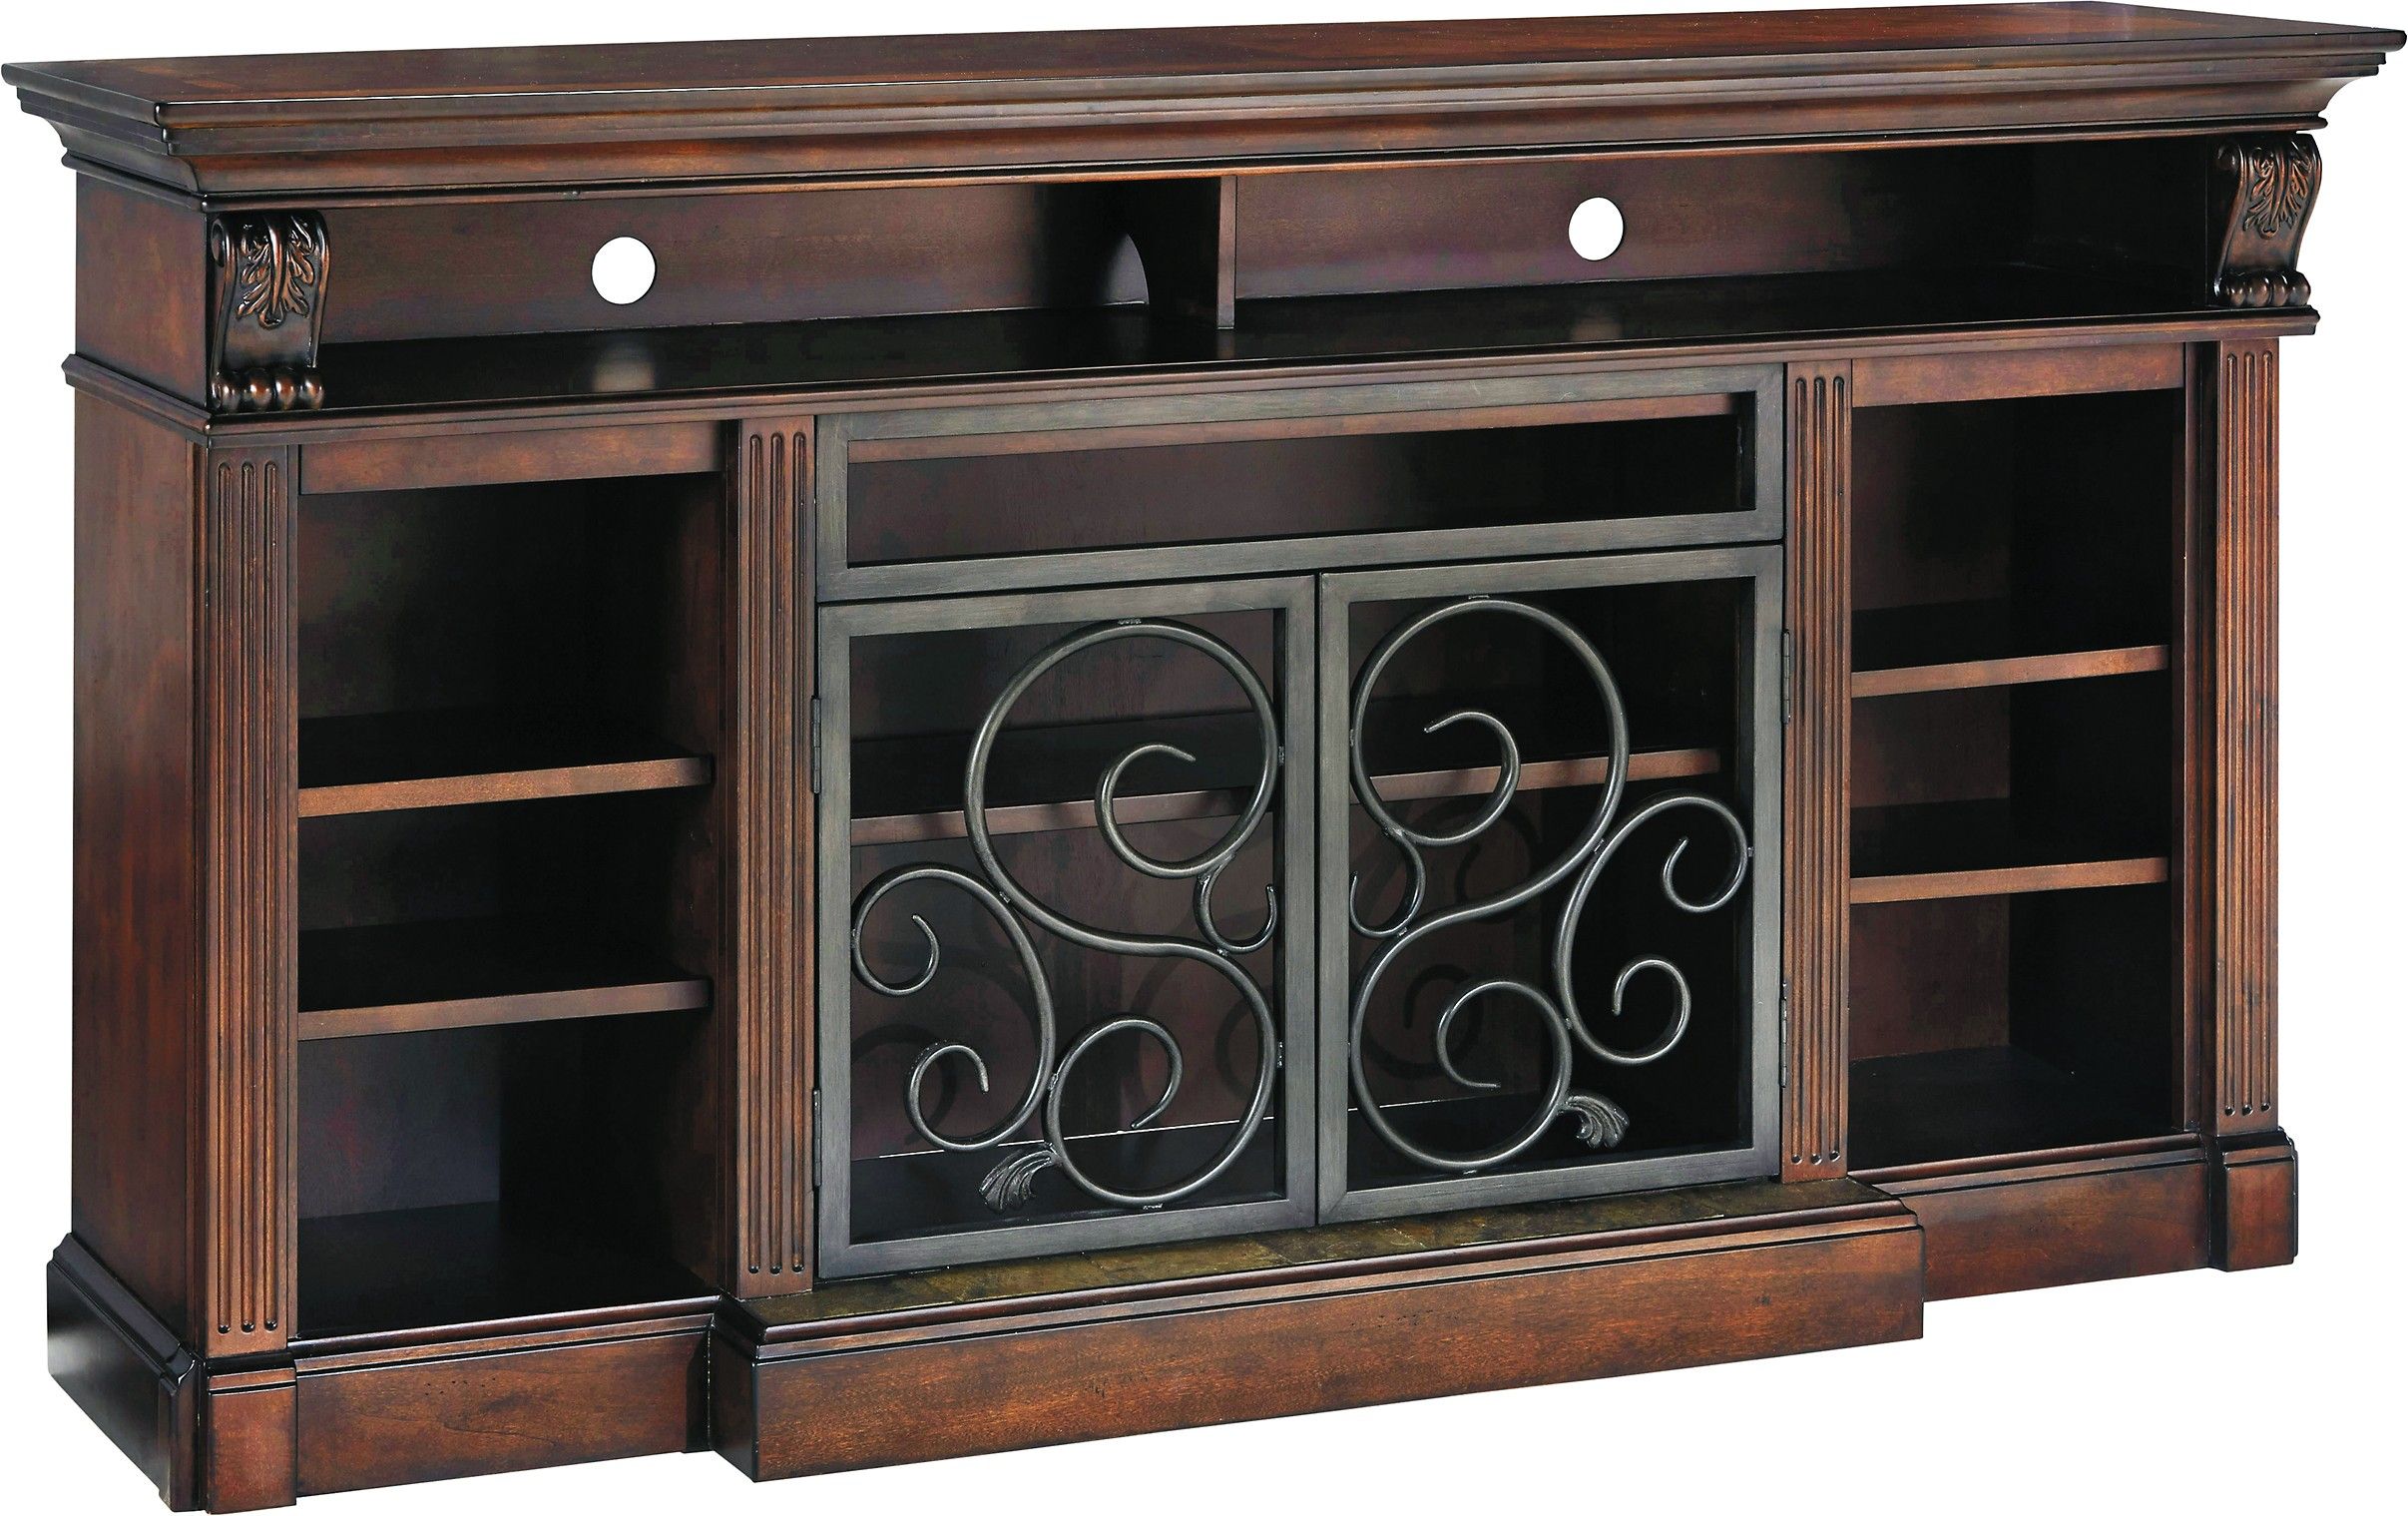 70 Tv Stand with Fireplace Inspirational ashley Alymere W669 88 Signature Design 72" X Large Tv Stand